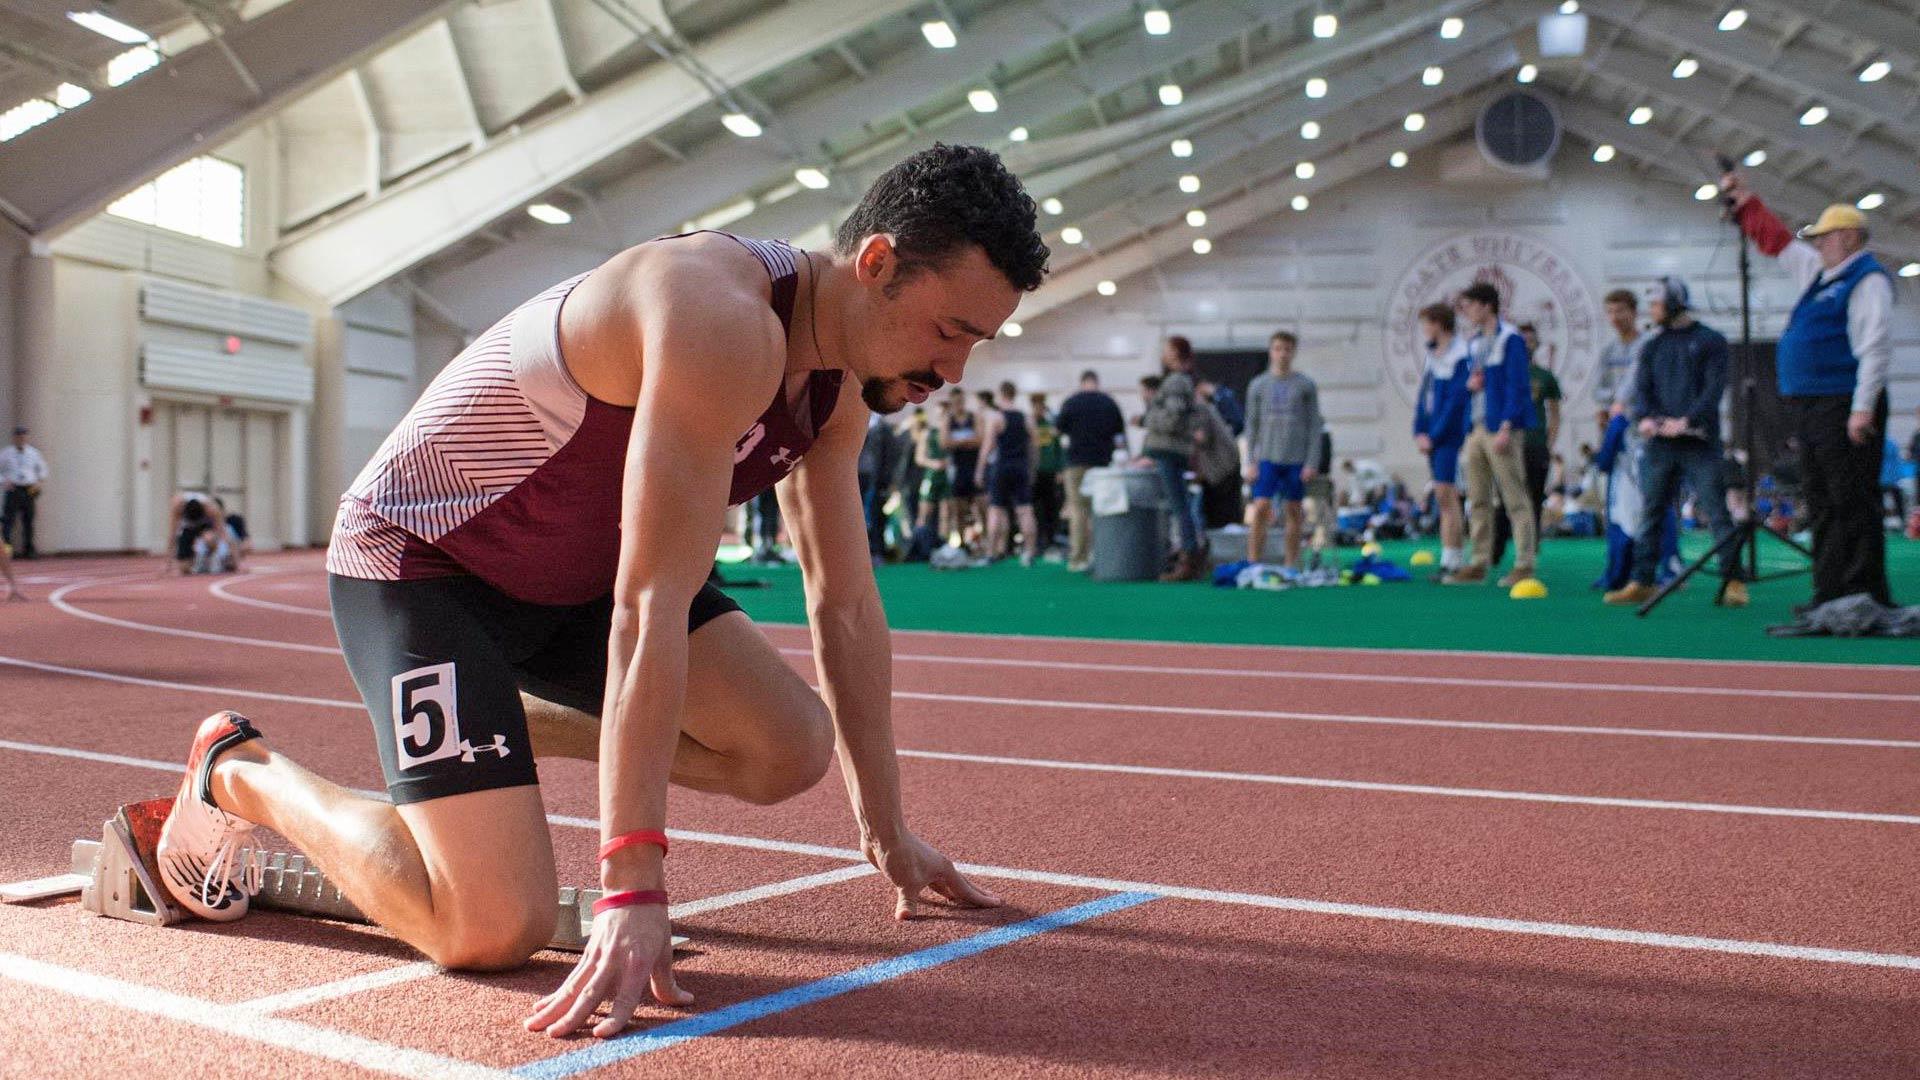 Oliver Moe at the starting block for a race in Colgate's Sanford Field House